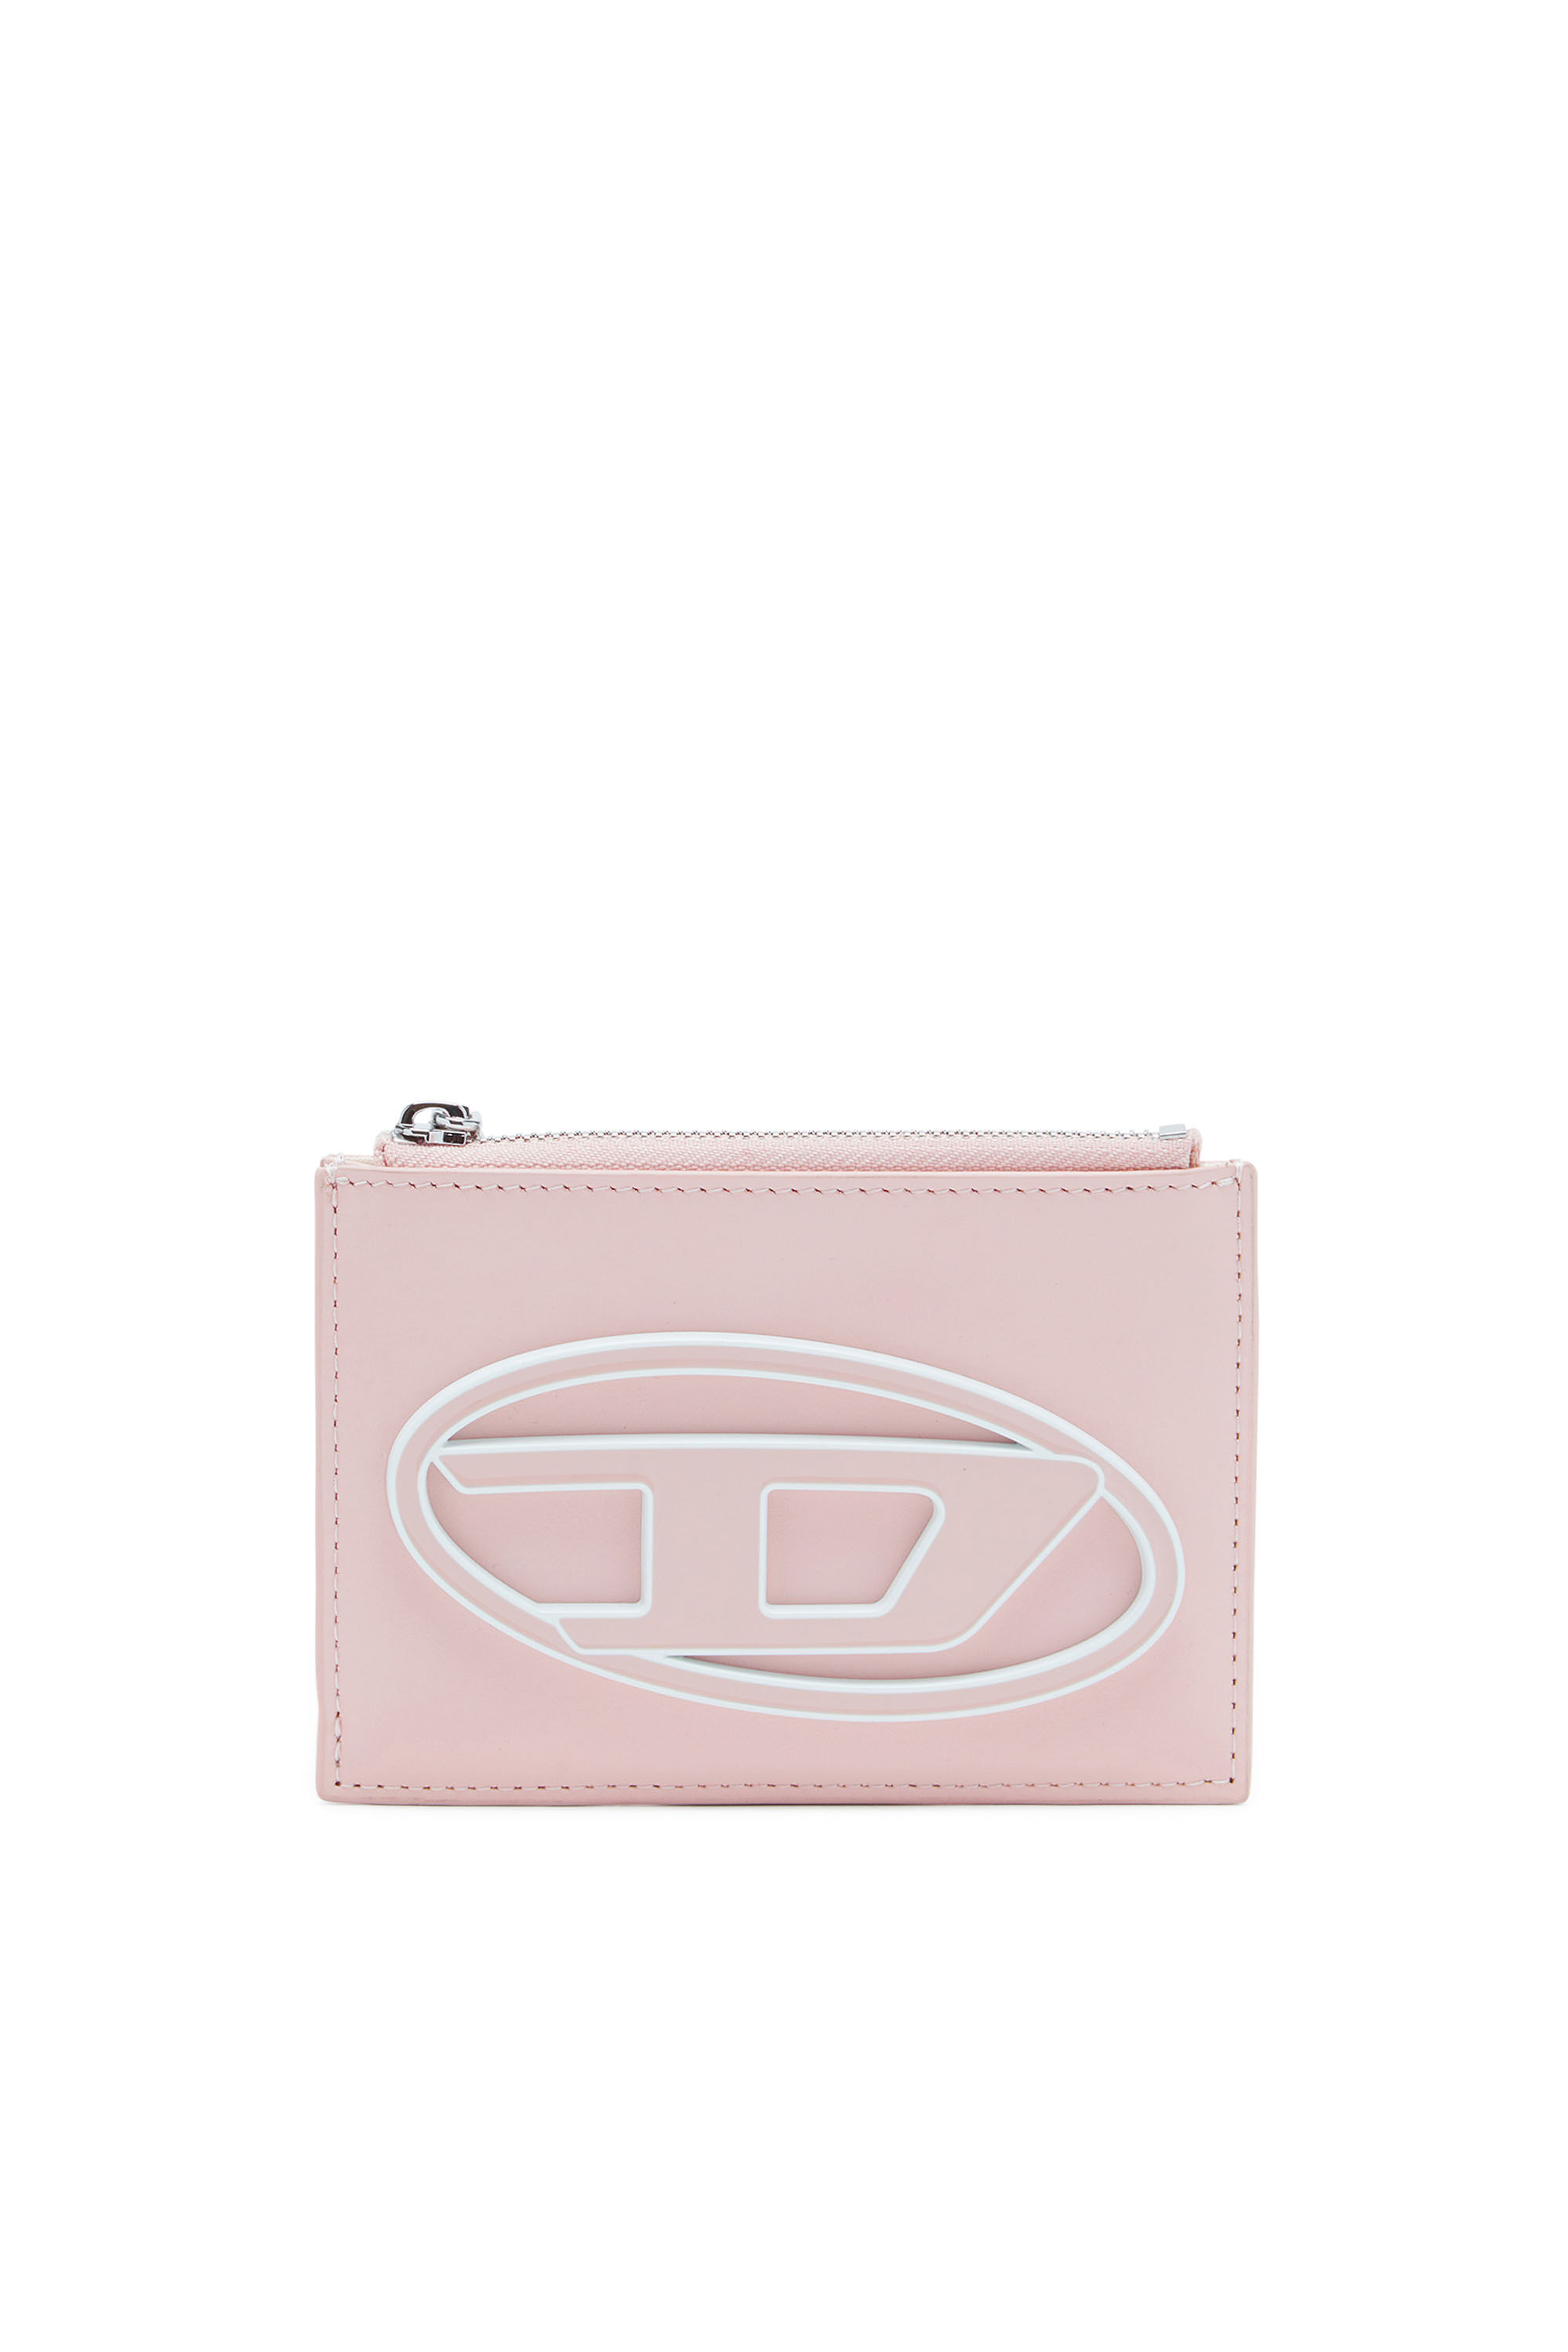 Diesel - 1DR CARD HOLDER I, Woman Card holder in pastel leather in Pink - Image 1